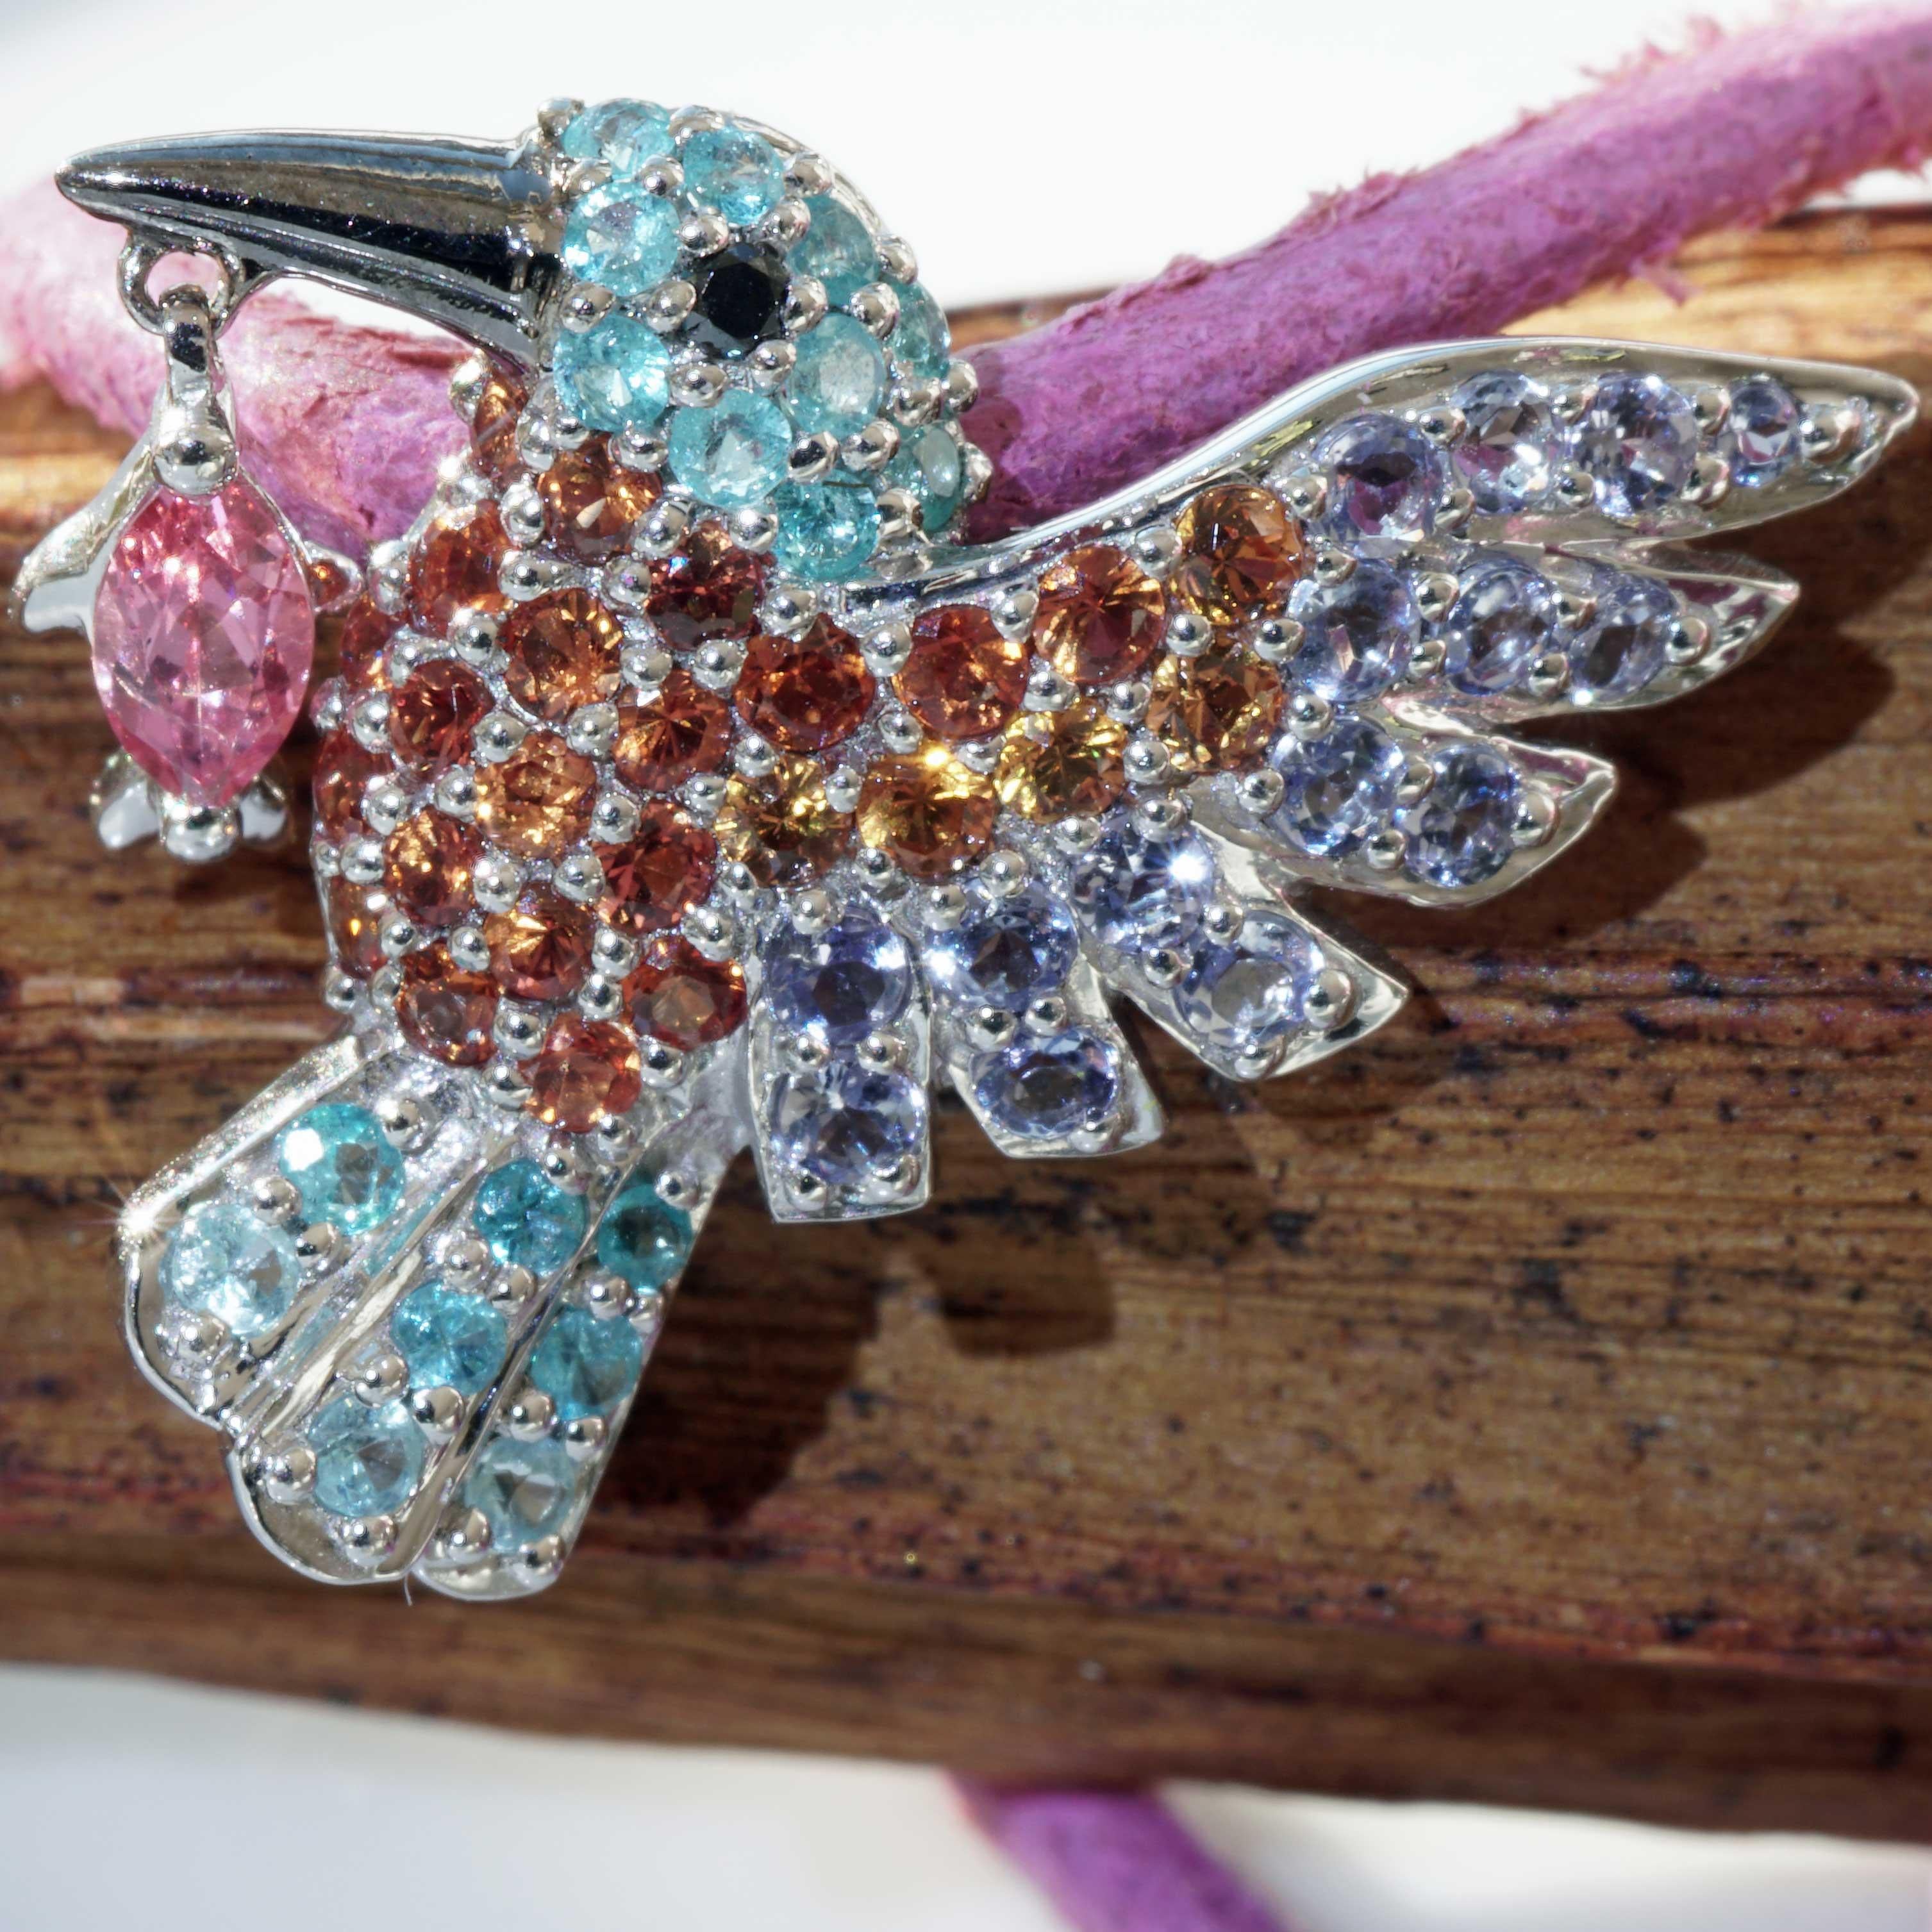 Kingfisher Bird Pendant Paraiba Tourmaline and Spinel most extravagant Colors  For Sale 1